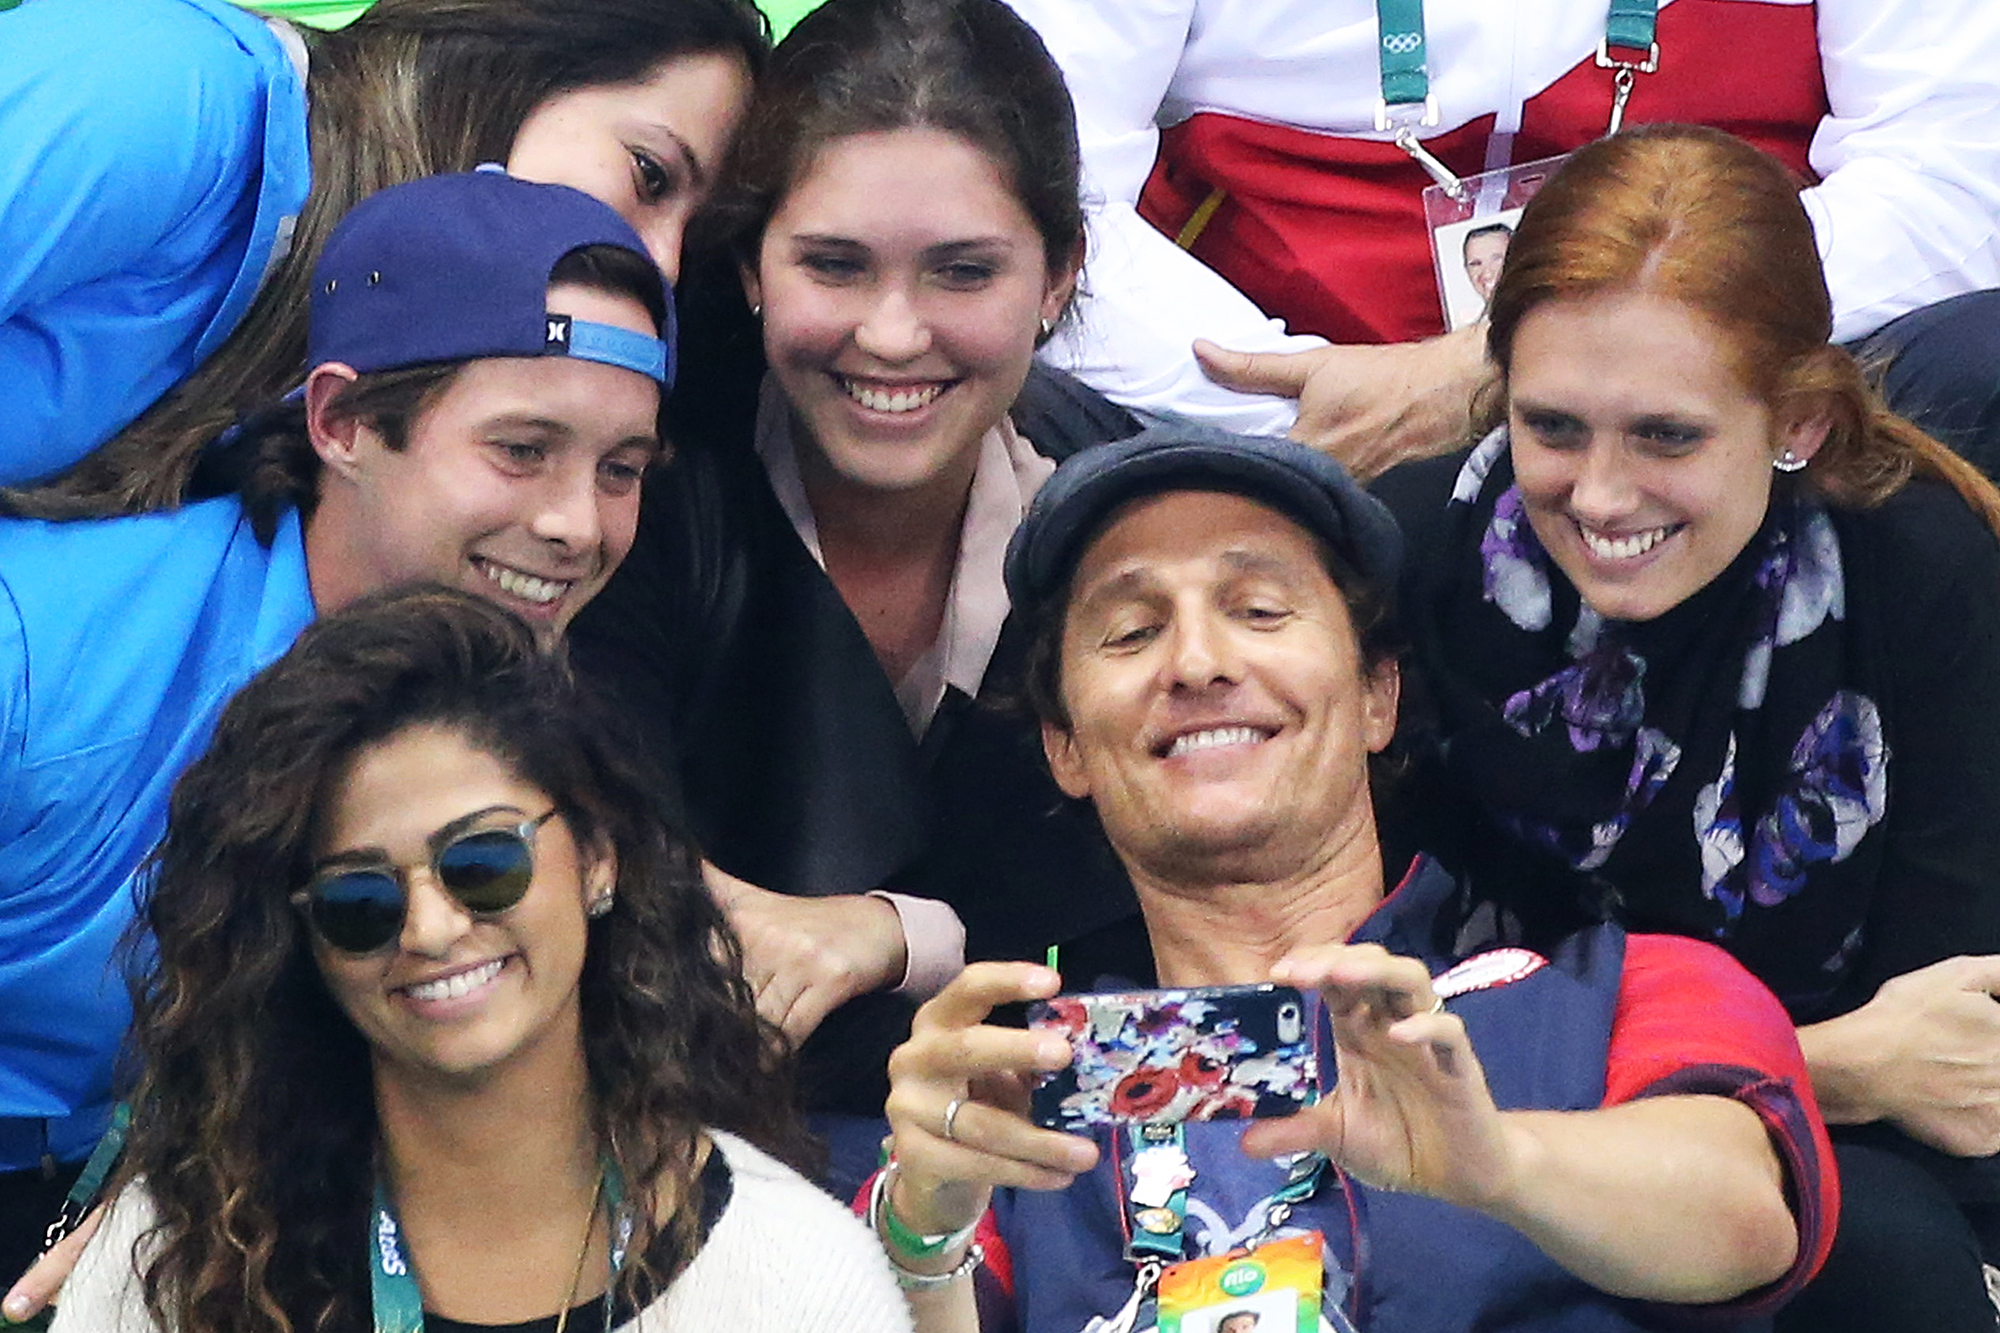 Matthew McConaughey and Camila Alves attend the swimming finals on day 5 of the Rio 2016 Olympic Games, on Aug. 10, 2016 in Rio de Janeiro, Brazil.